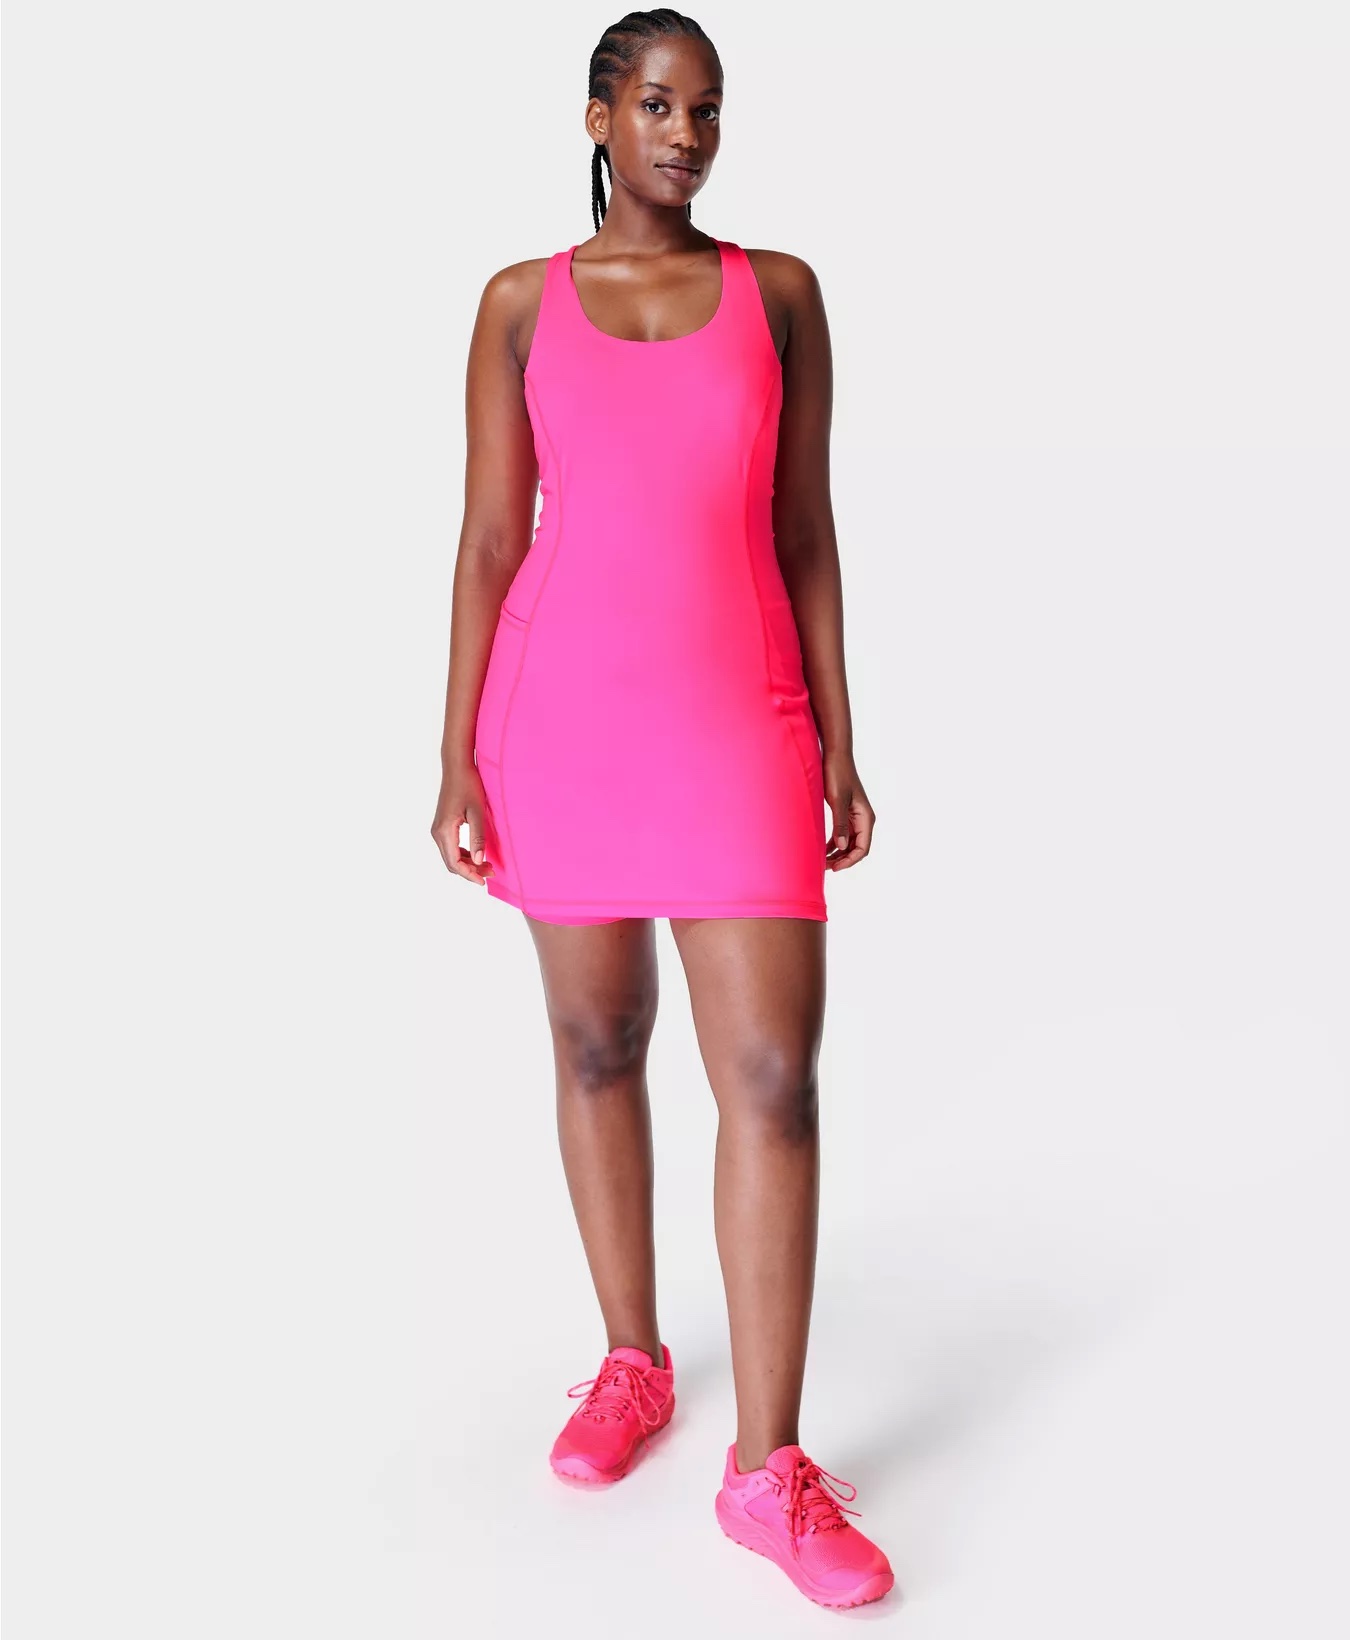 Exercise dress in pink punch👀I don't see any logo added on the